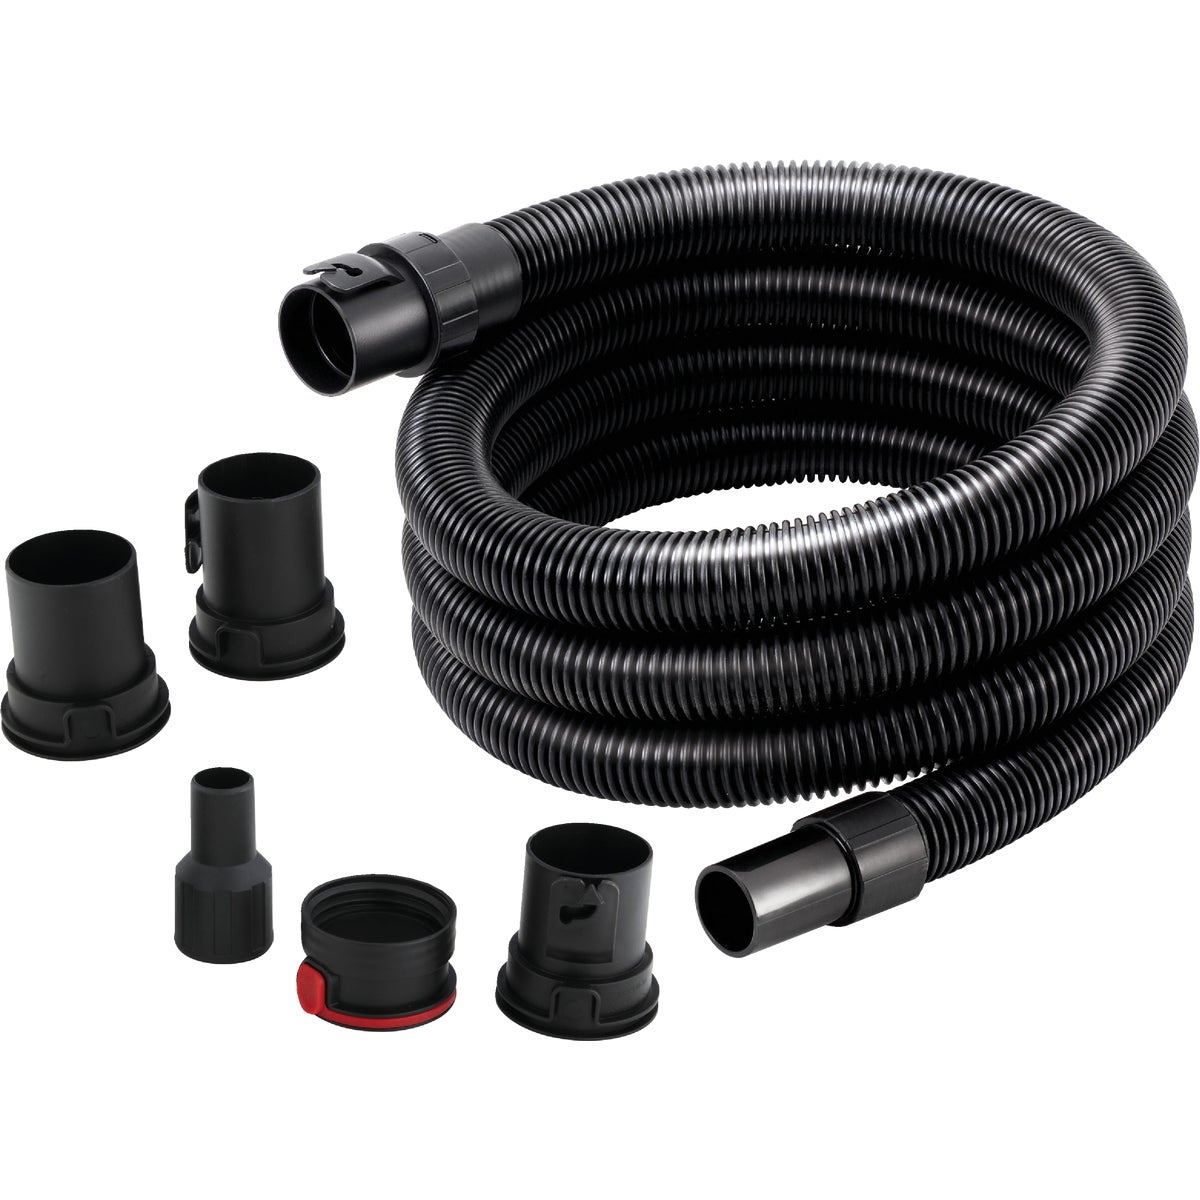 Channellock 1-7/8 In. Dia. x 7 Ft. L. Black Plastic Wet/Dry Vacuum Hose with Adapter & Connectors